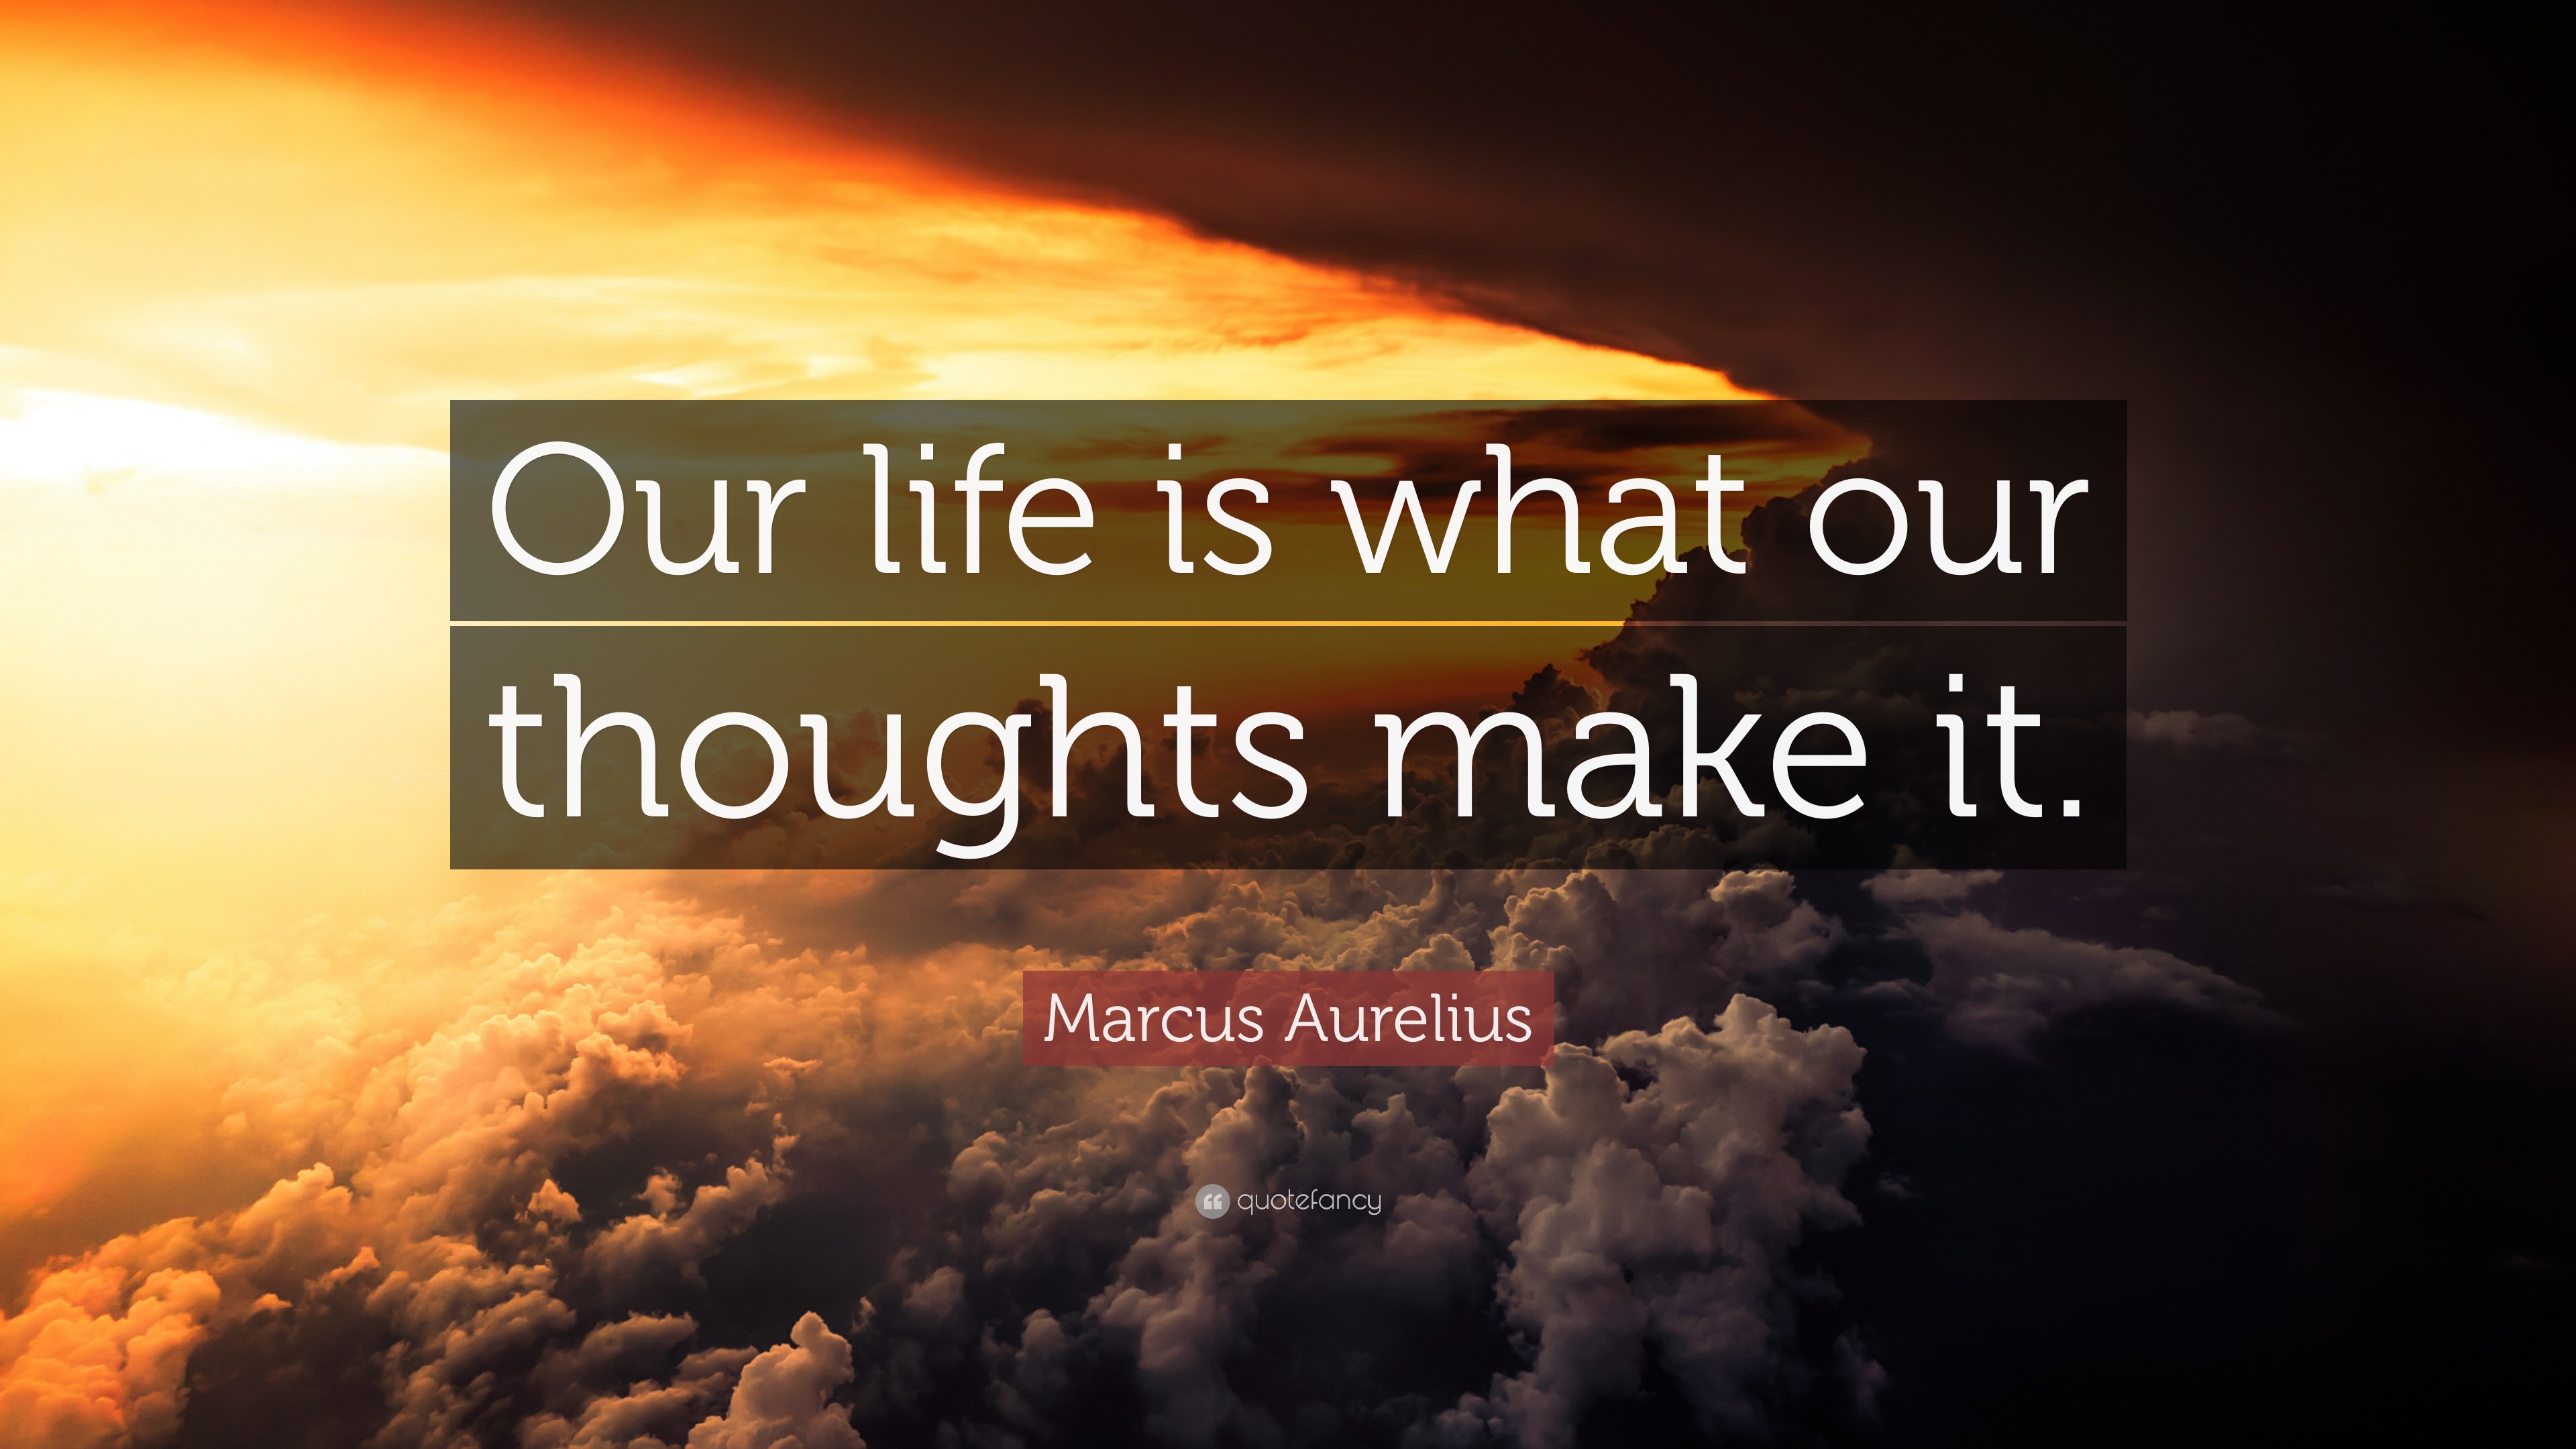 Marcus Aurelius Quote: “Our life is what our thoughts make it.” (24